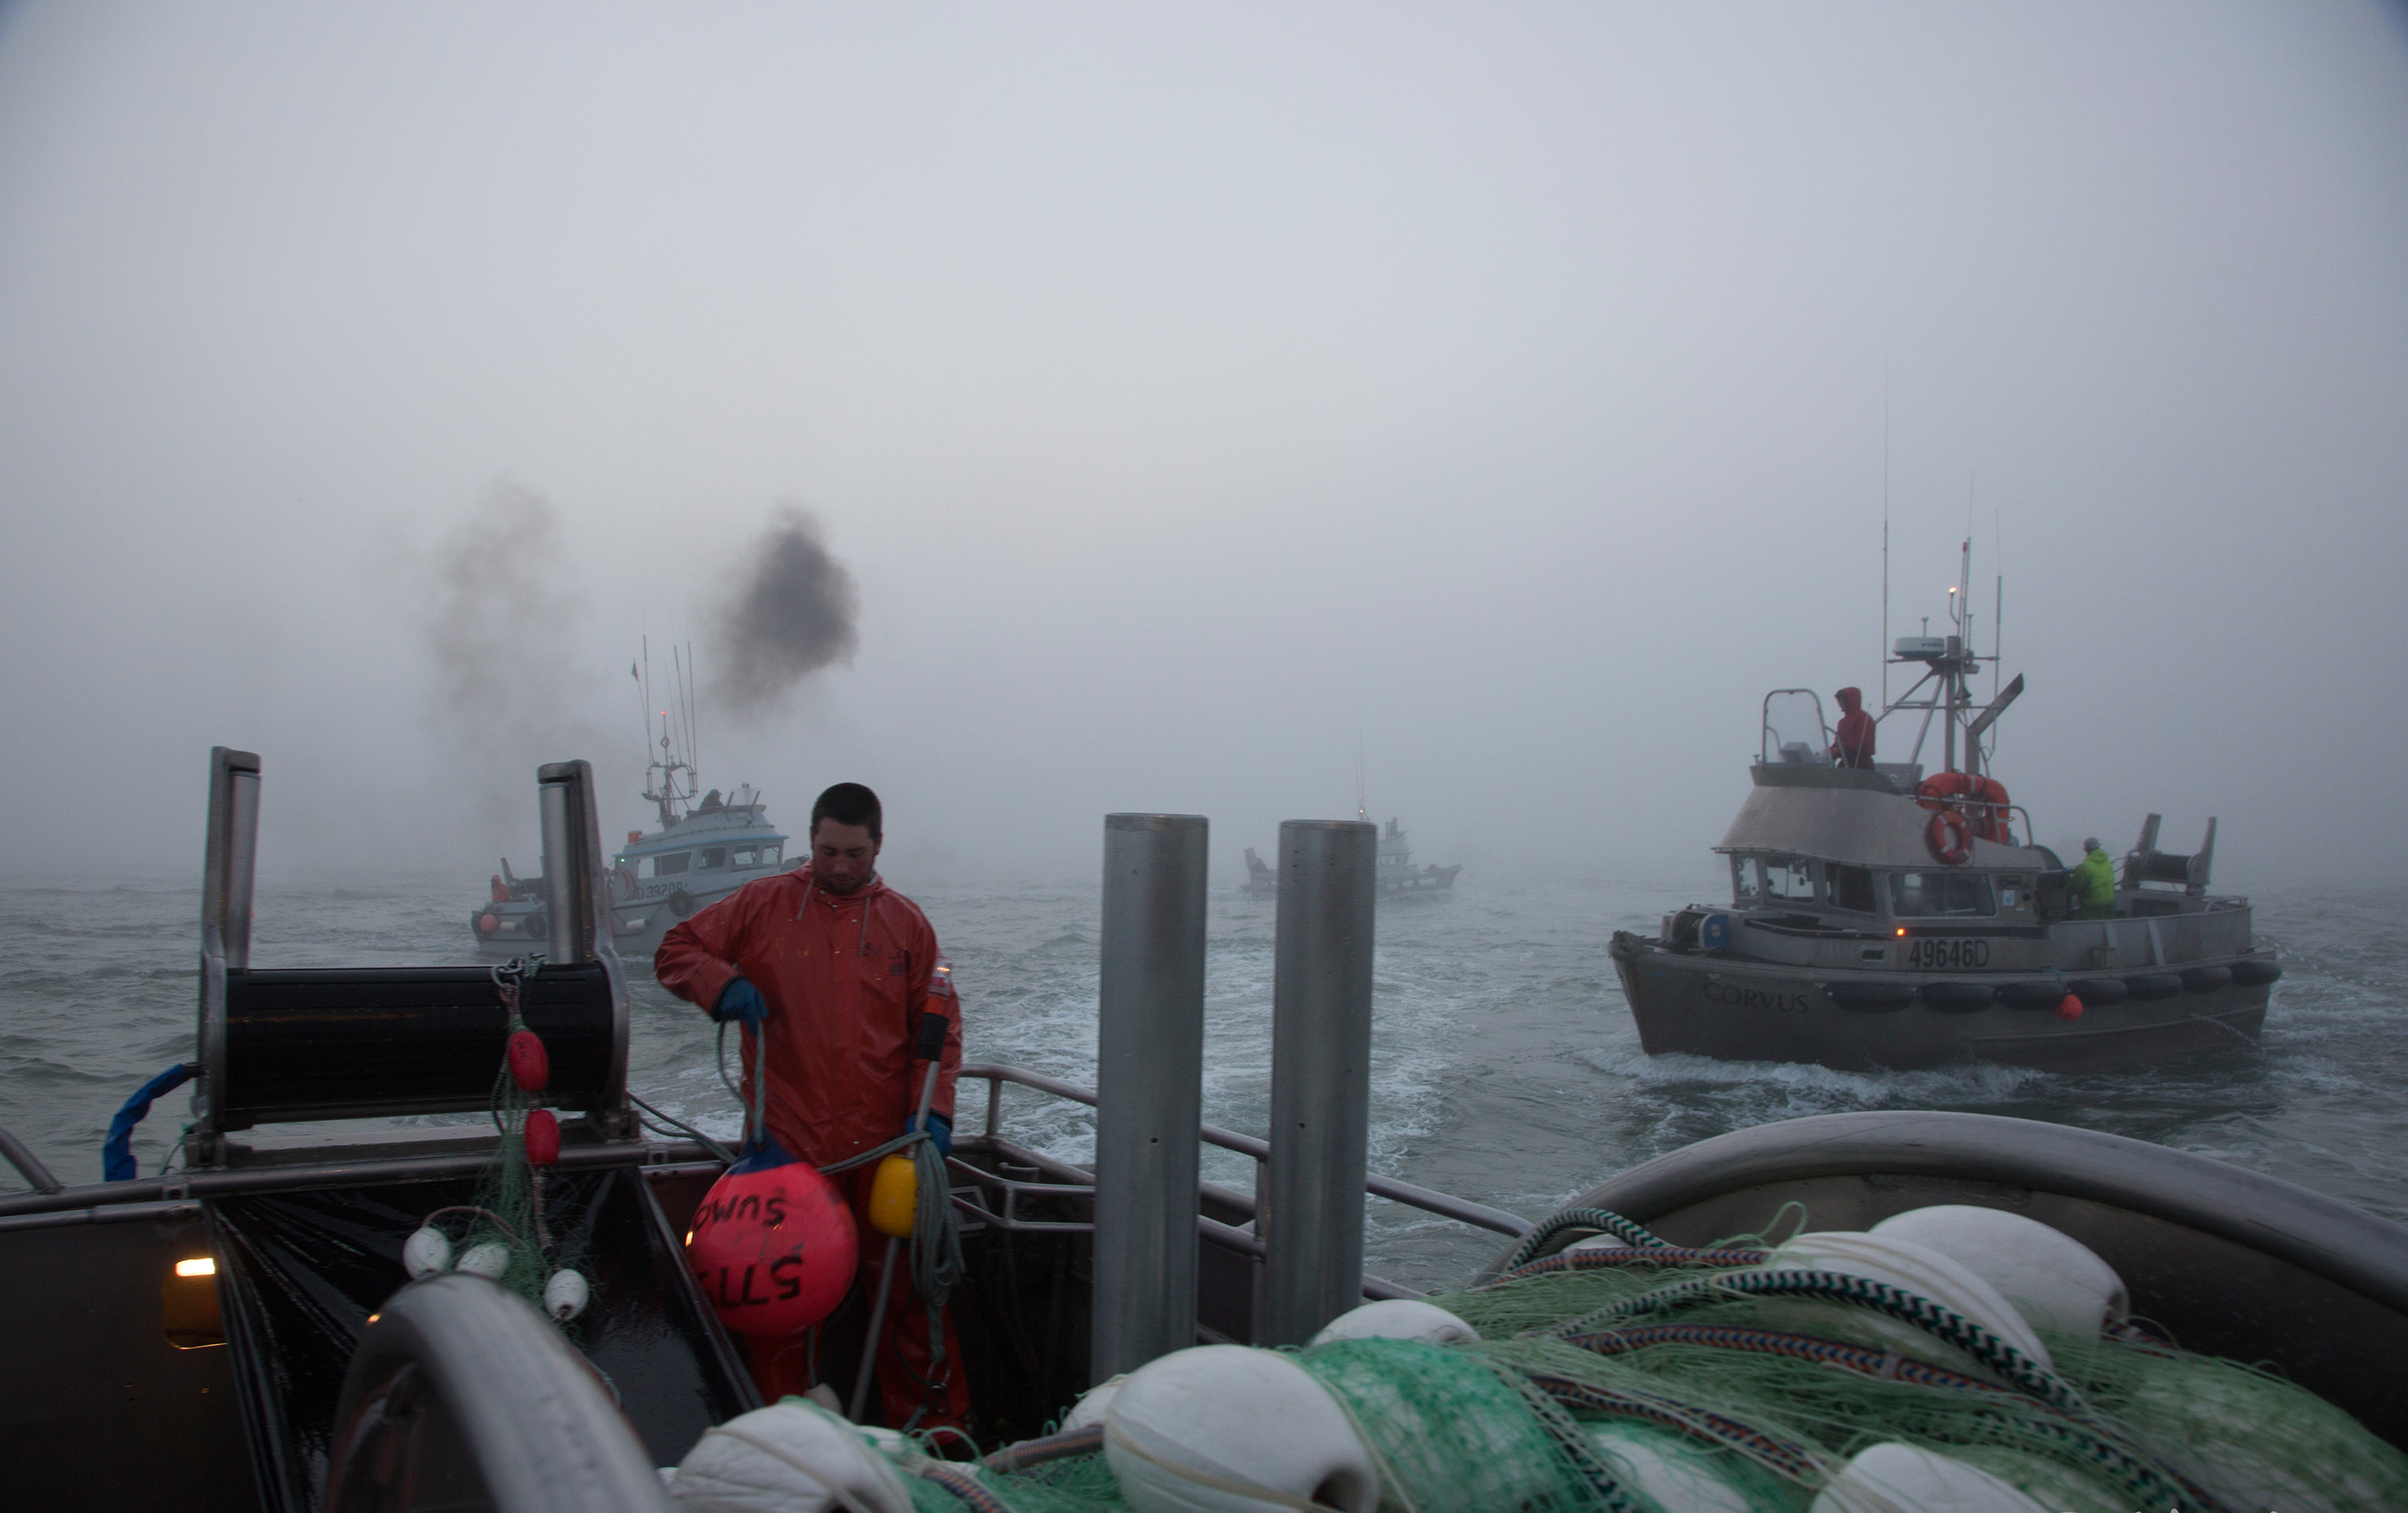 Commercial drift boats gather in one location and people onboard prepare to begin fishing in Bristol Bay.